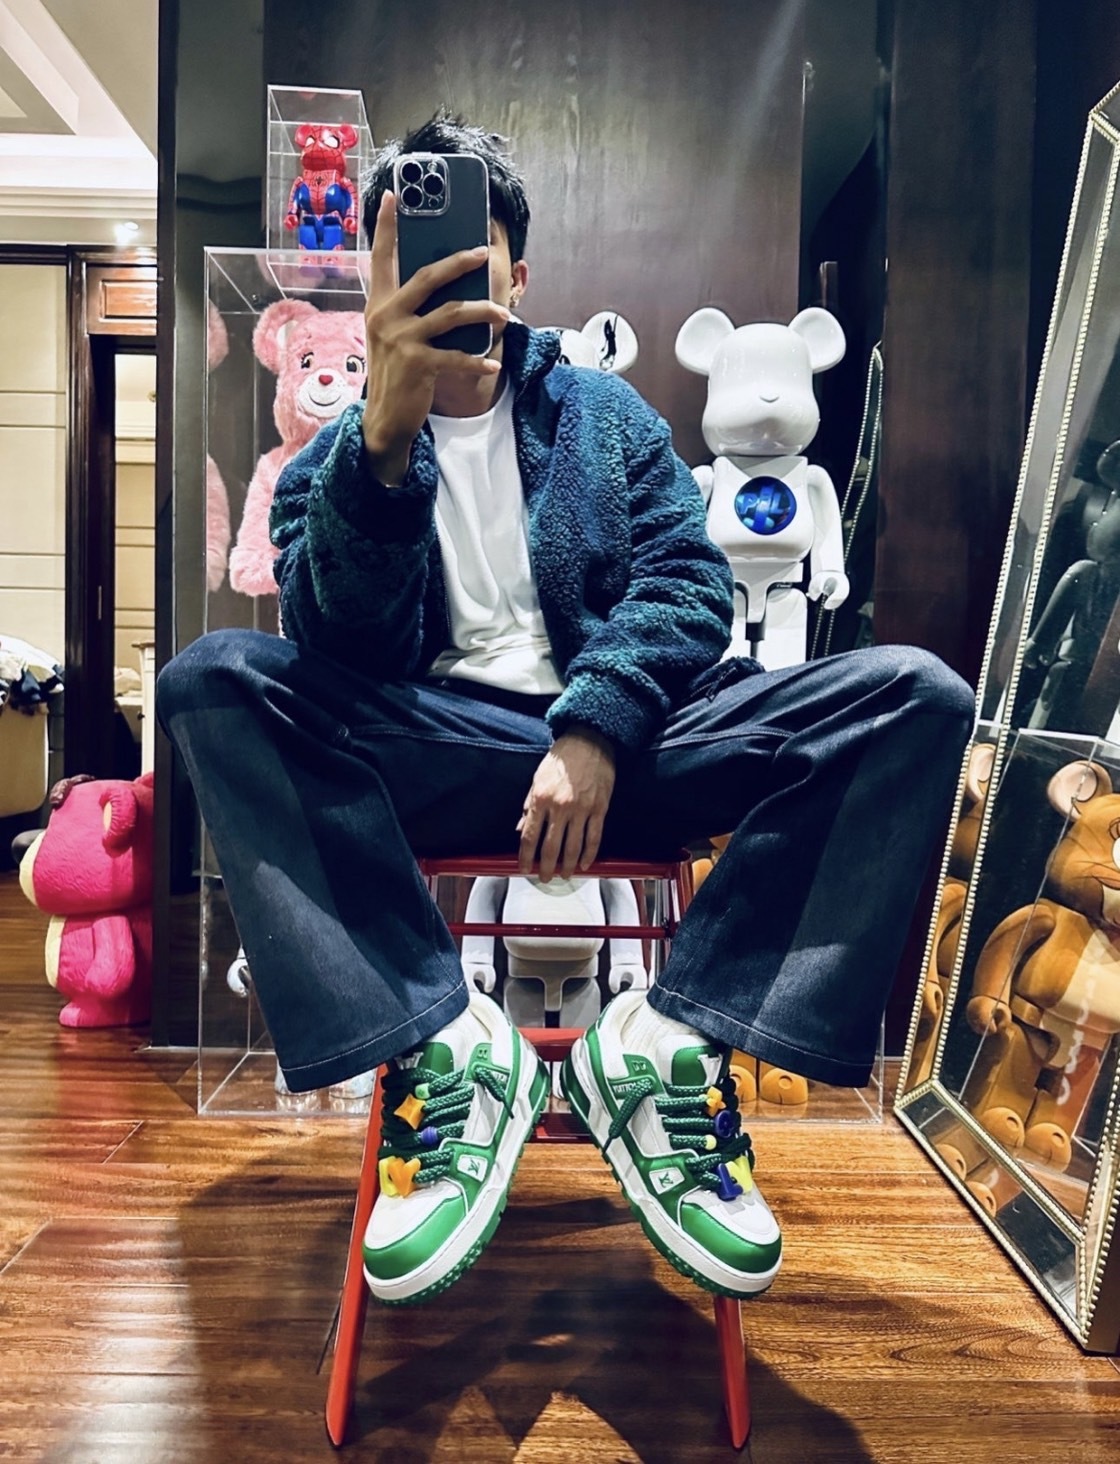 LOUIS VUITTON LV TRAINER MAXI SNEAKERS IN GREEN